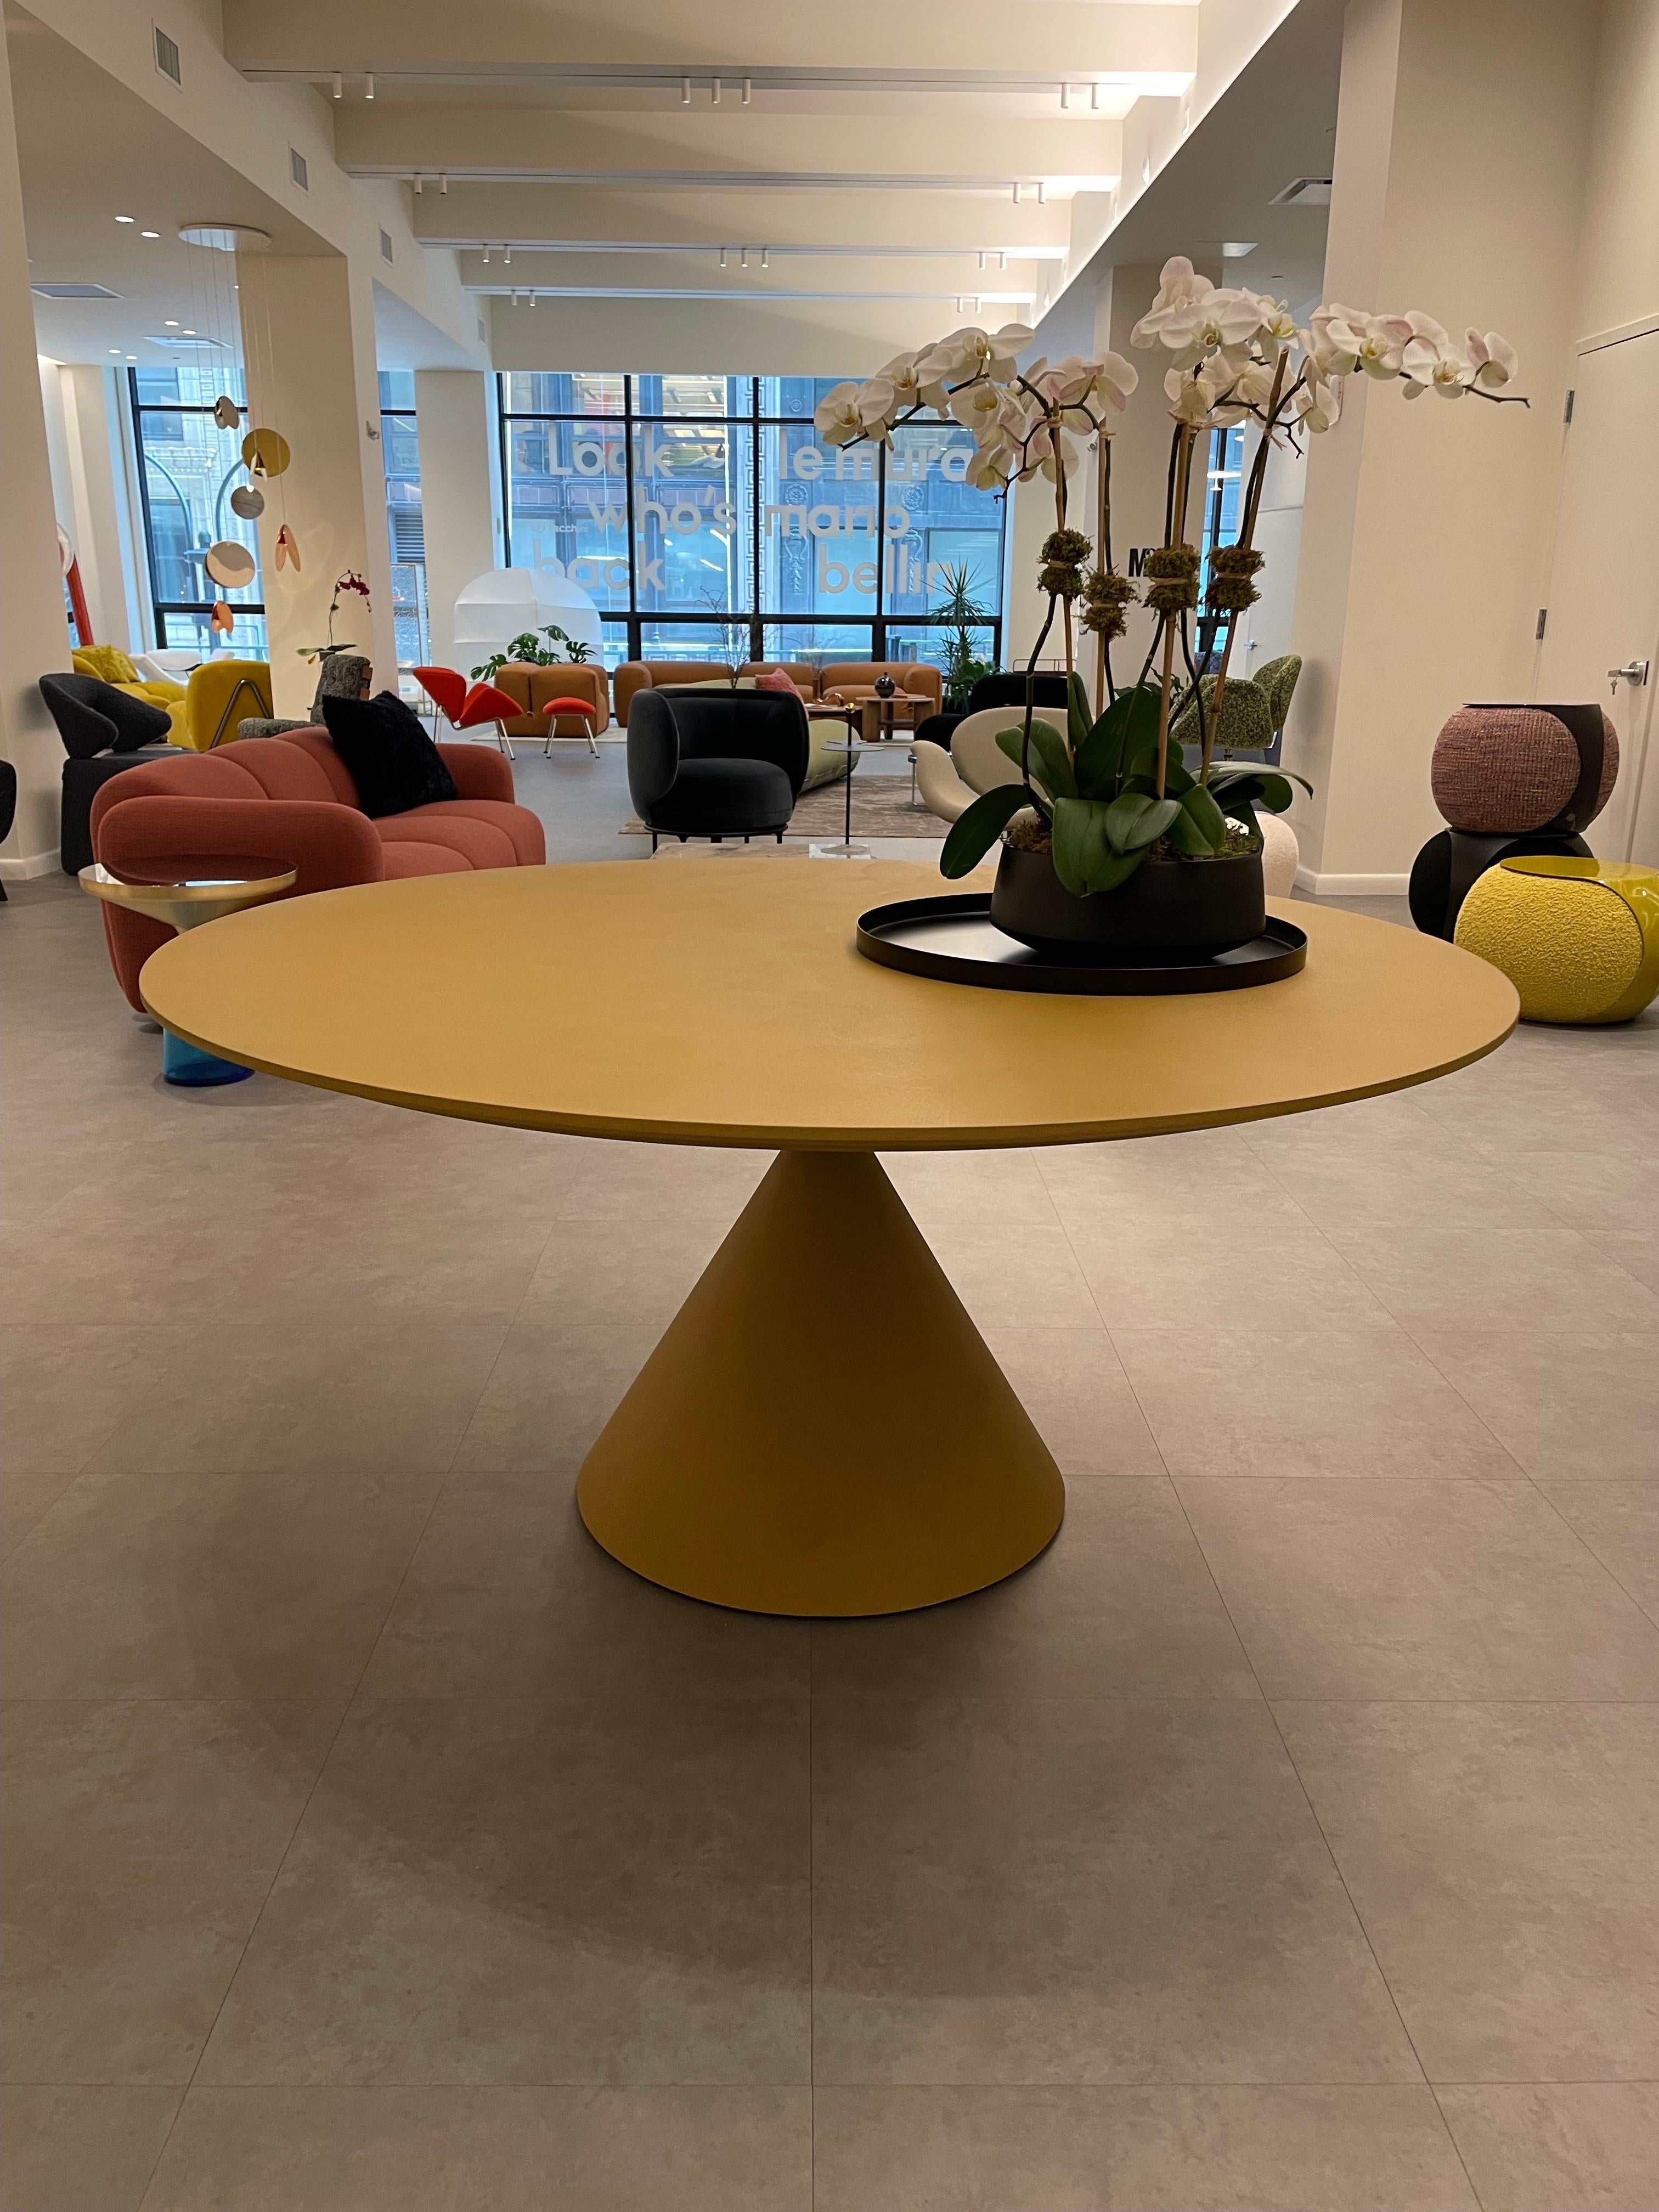 CLAY INDOOR TABLE Diam.160cm
TOP & BASE D57 ochre concrete/TOP D57 ochre concrete
Table with rigid polyurethane base and MDF top, completely covered with hand-spread paste. Table height 75,5 cm.